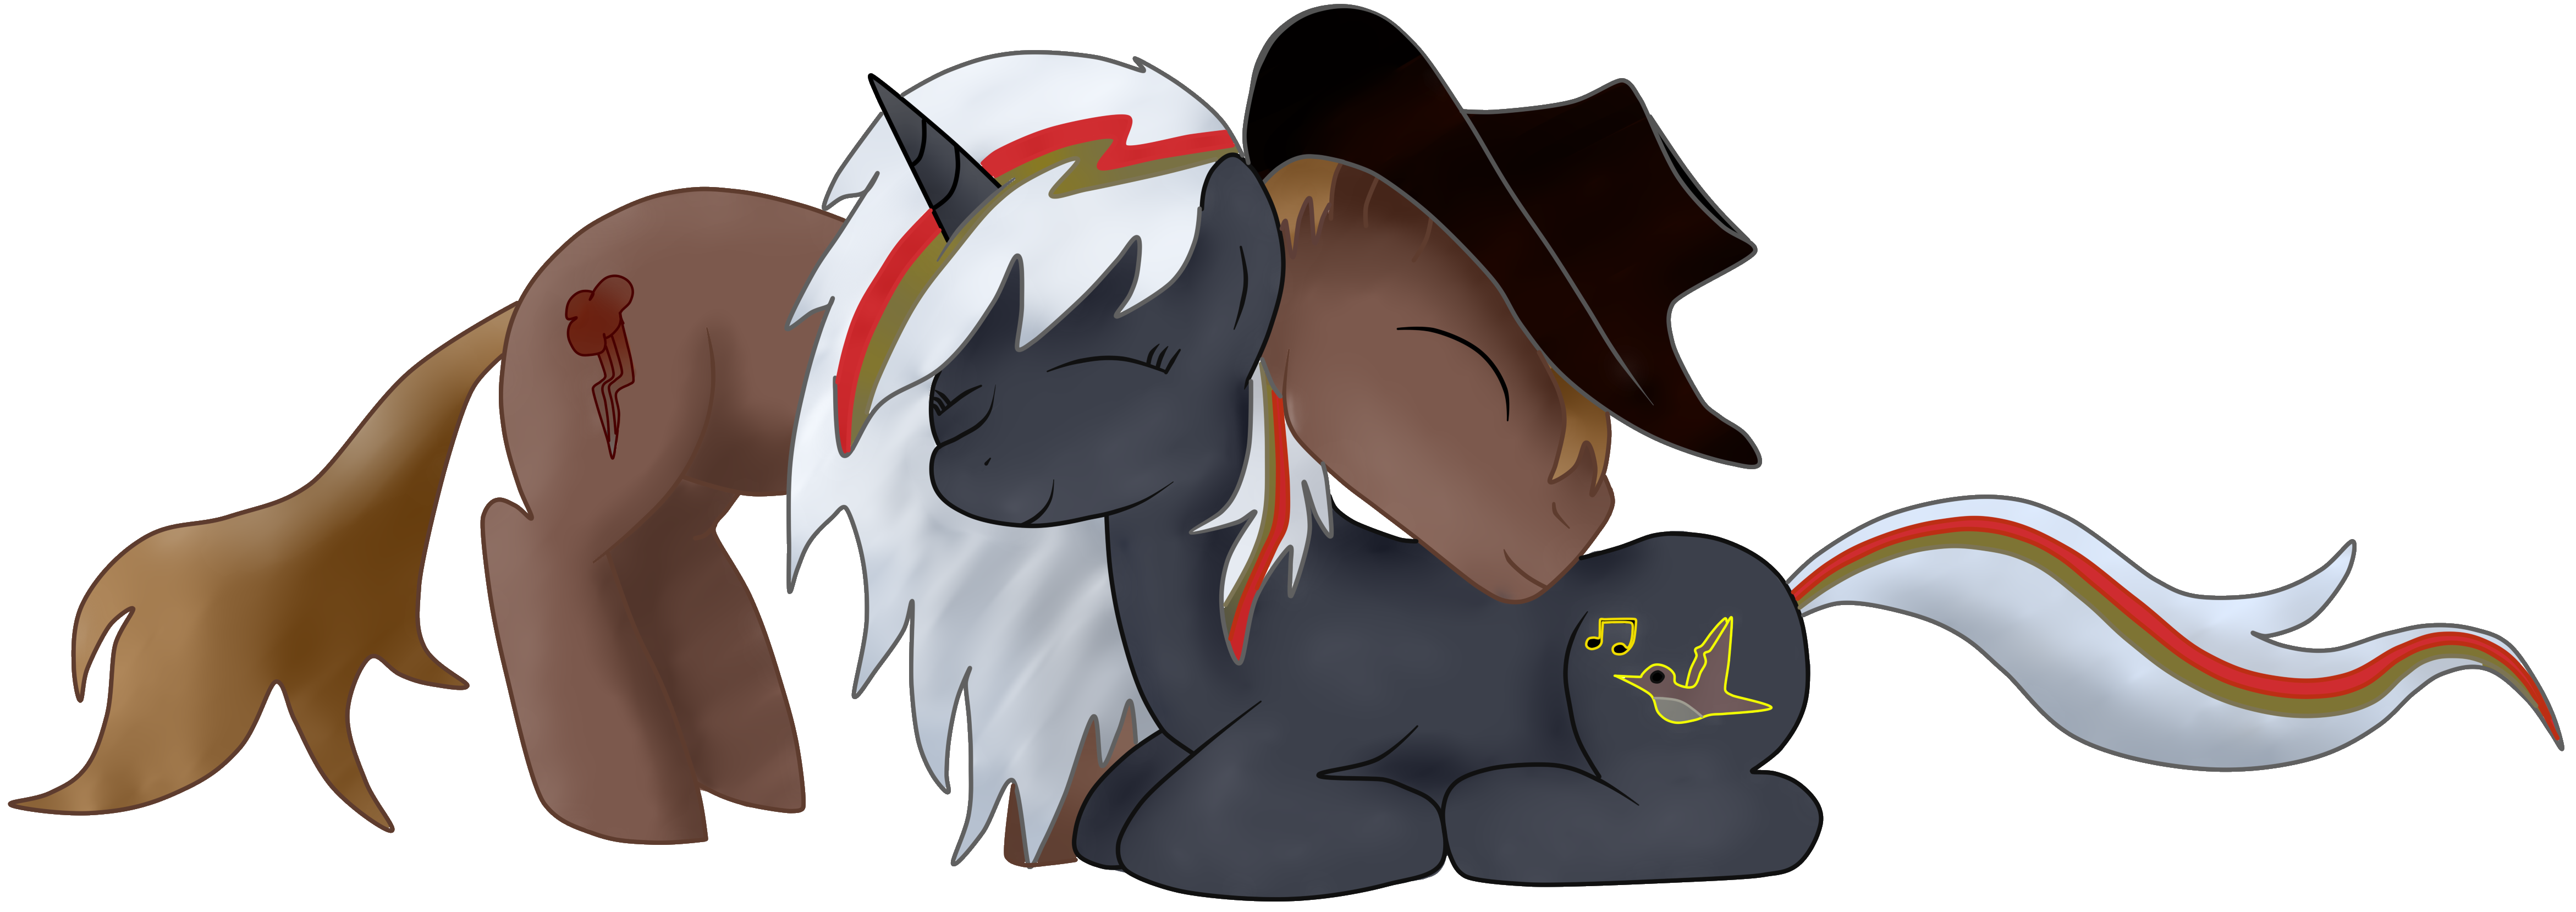 velvet_remedy_and_calamity_cuddle_by_alexthebrony-d4n3ug7.png